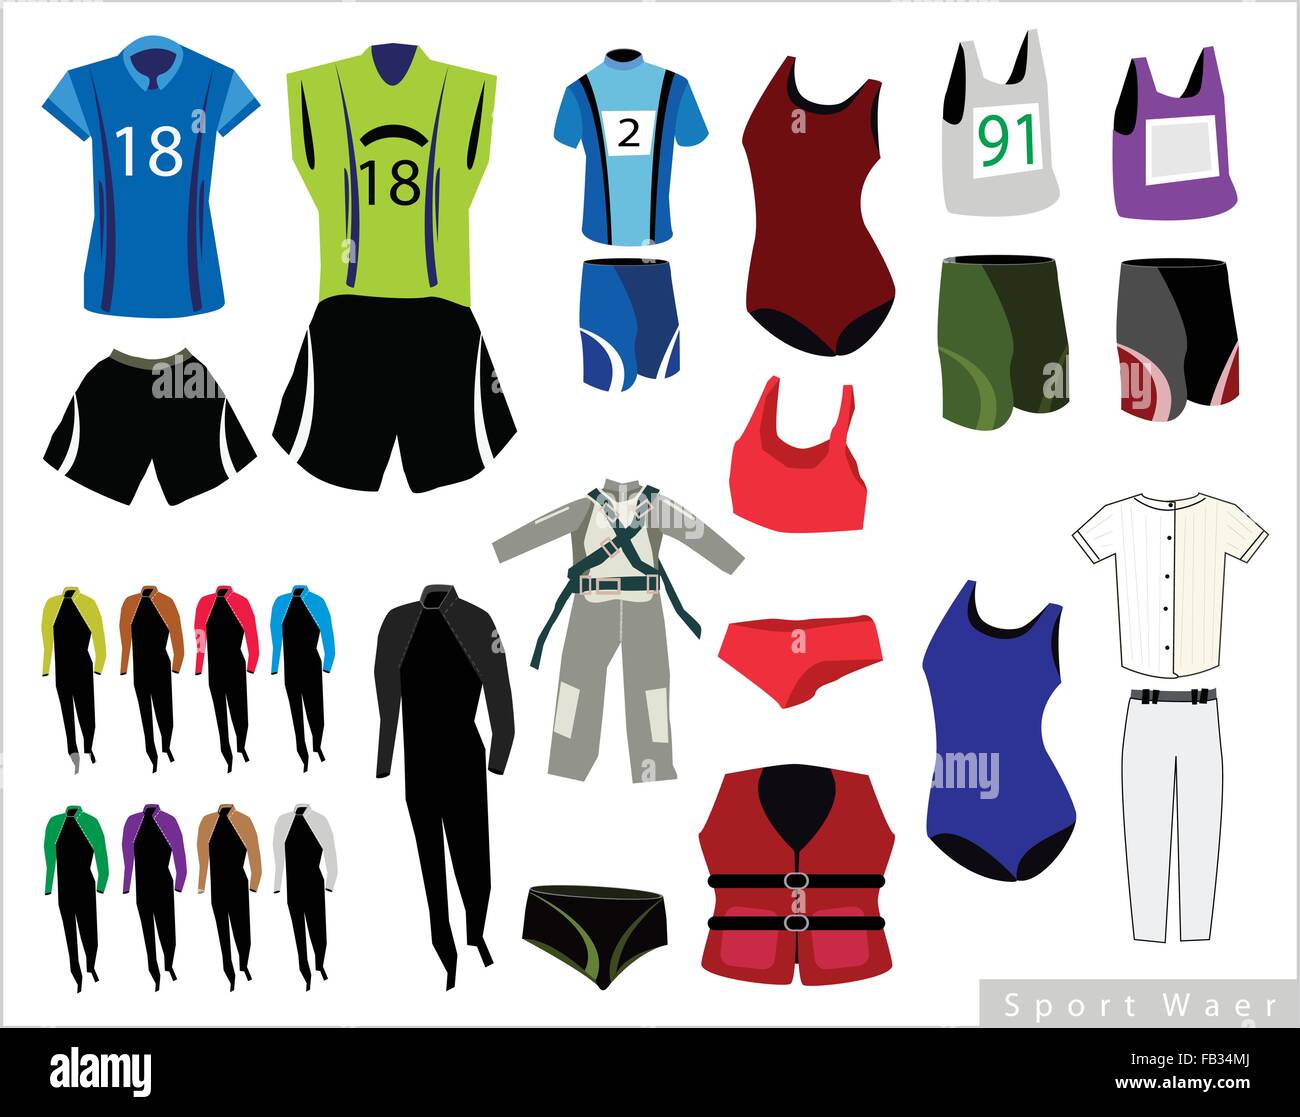 Illustration Collection of Sports Wears and Sport Uniforms Isolated on ...